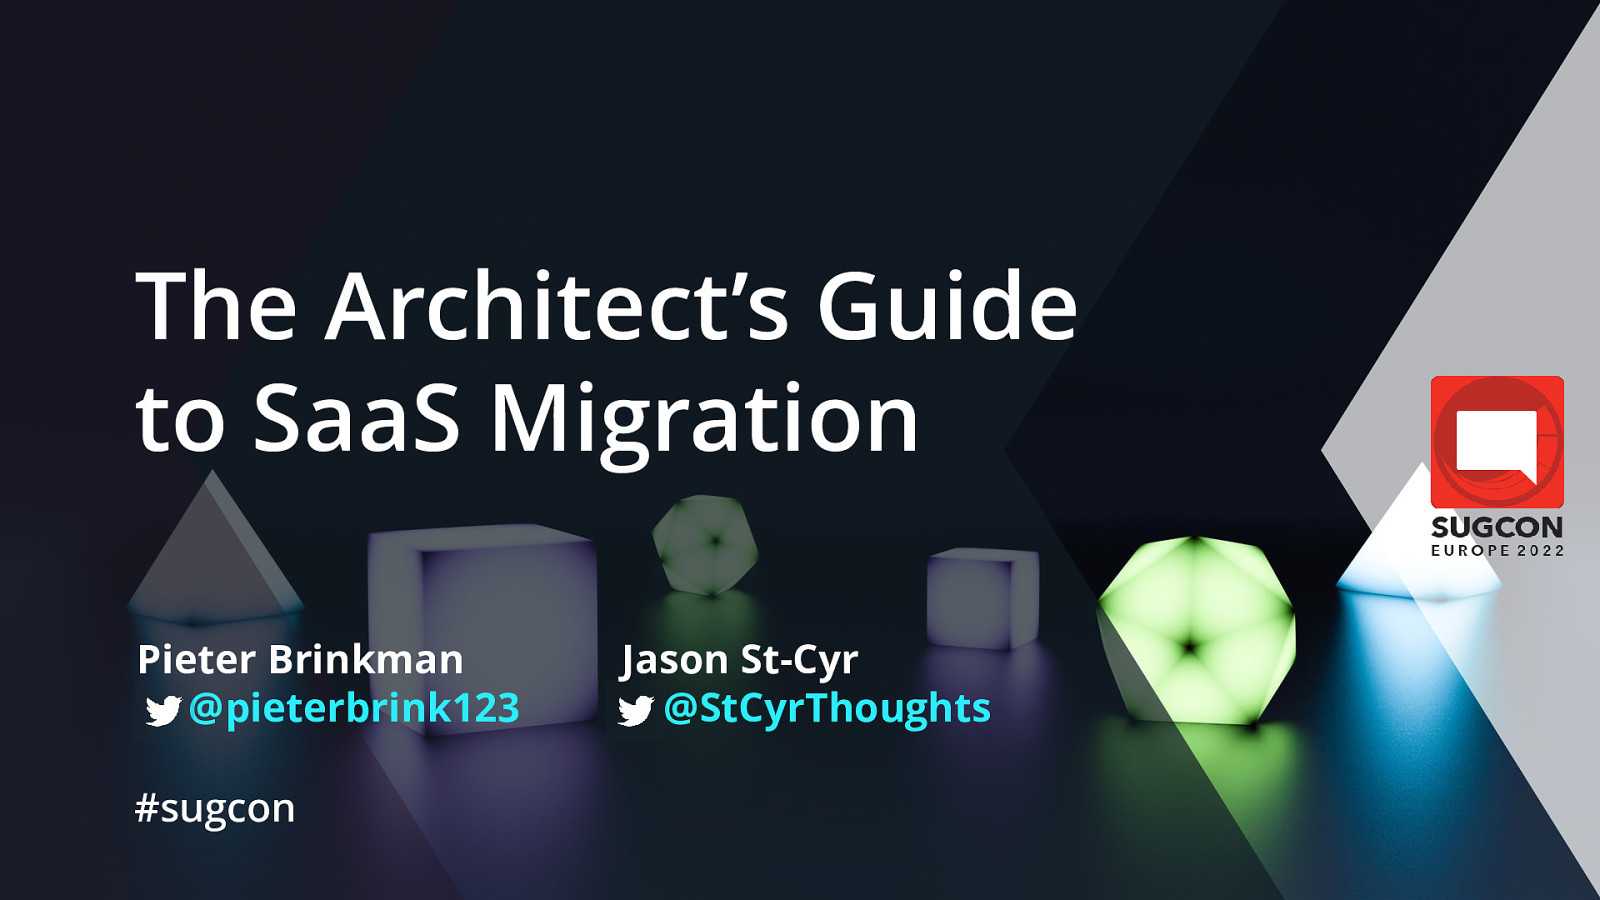 The Architect’s Guide to SaaS Migration